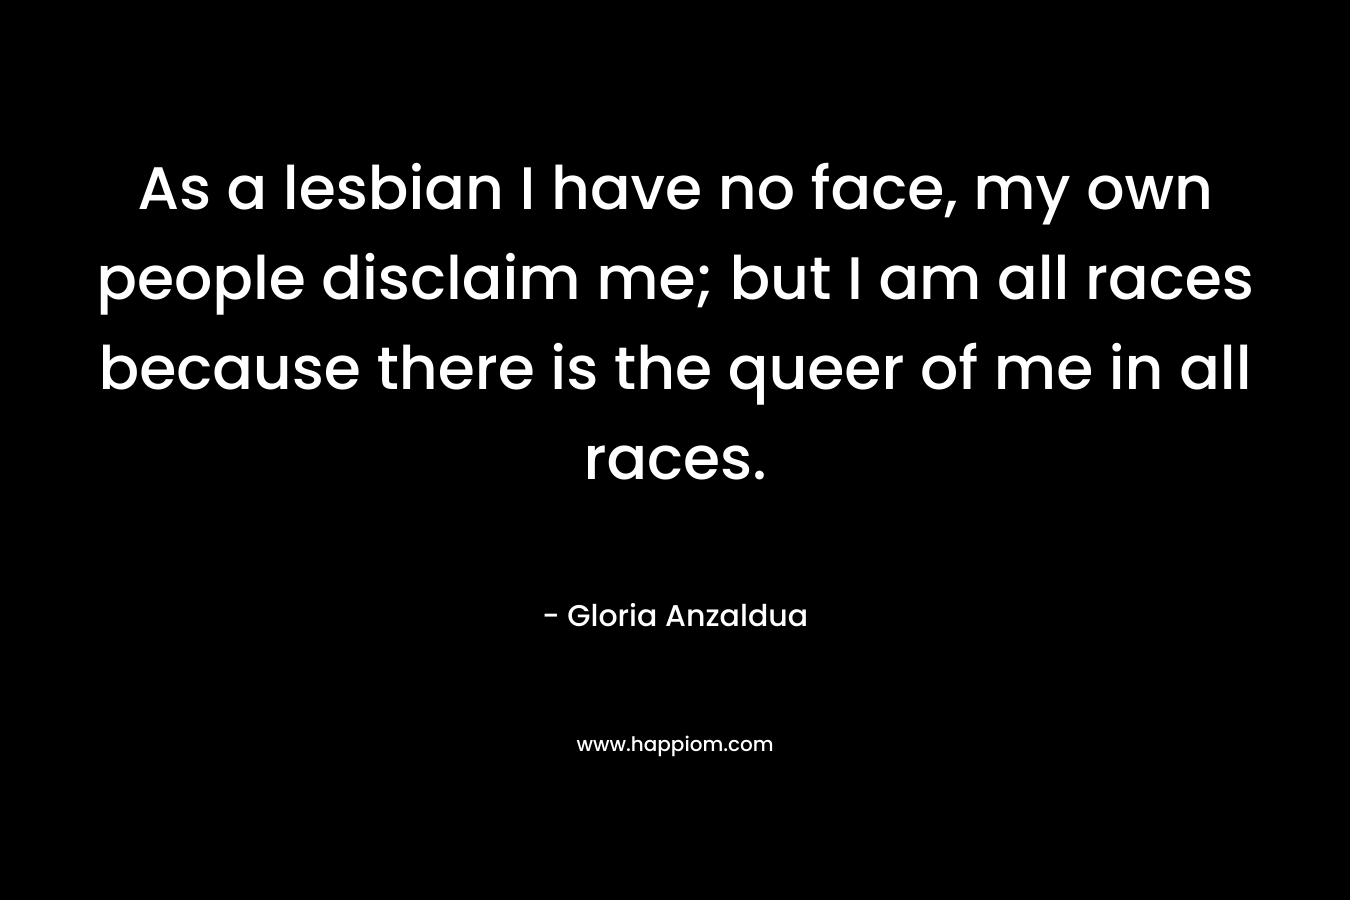 As a lesbian I have no face, my own people disclaim me; but I am all races because there is the queer of me in all races. – Gloria Anzaldua